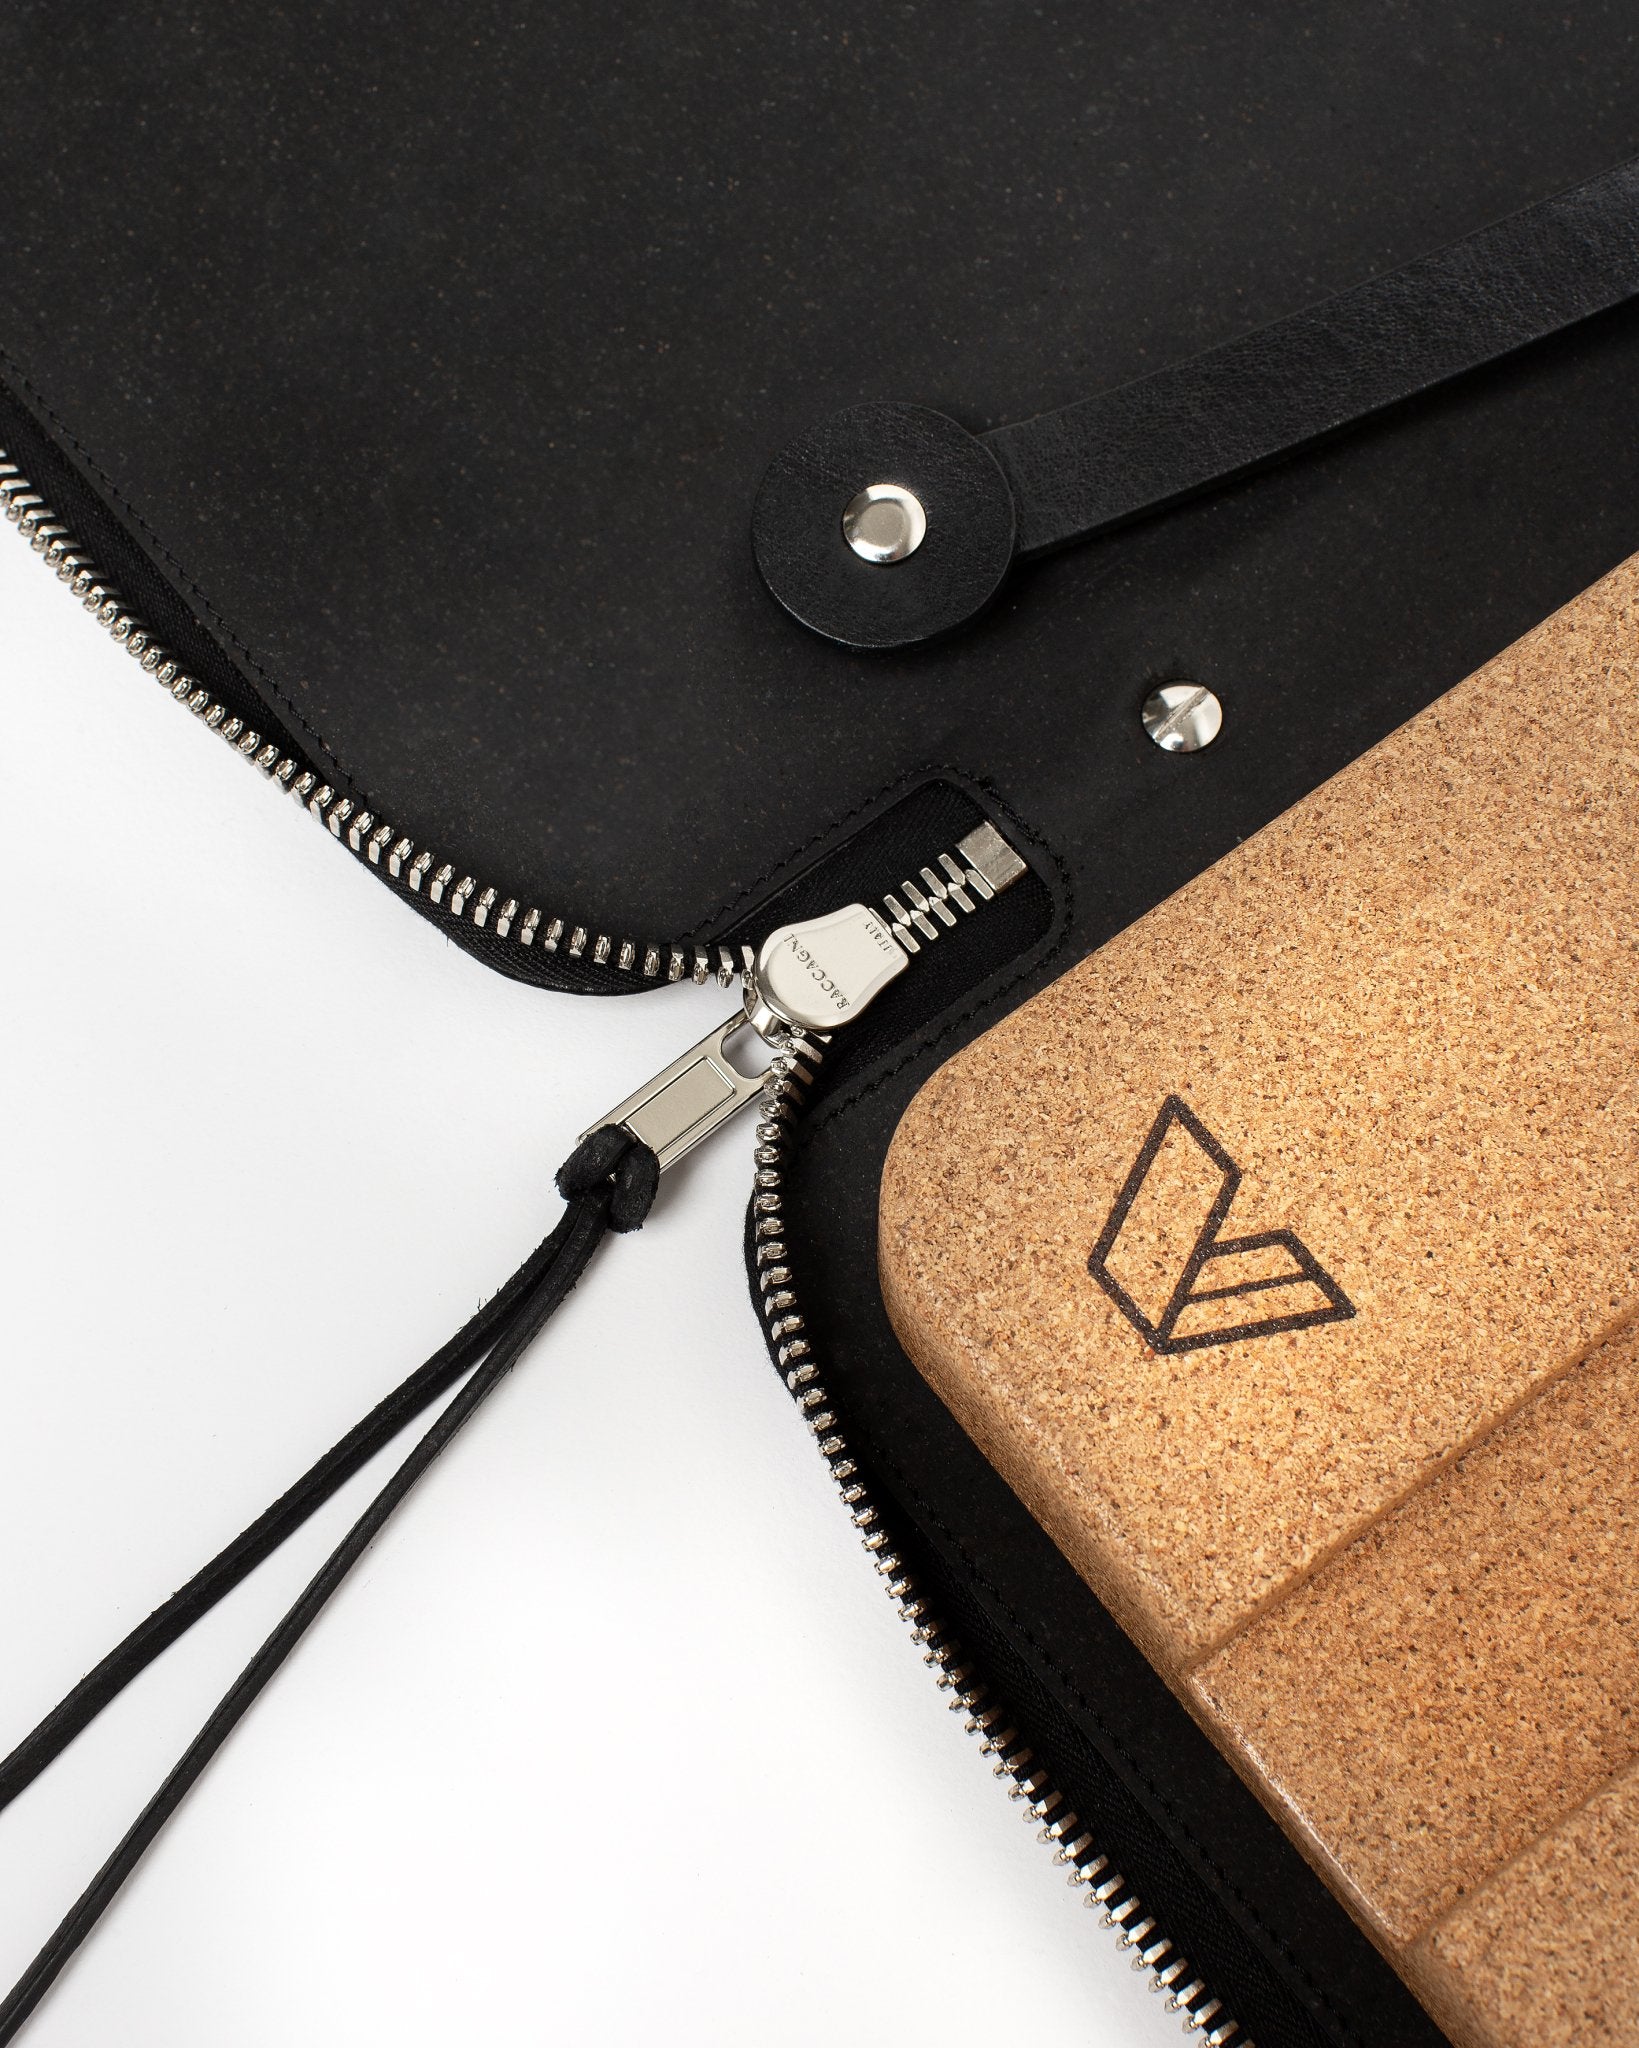 High end leather paddle case details